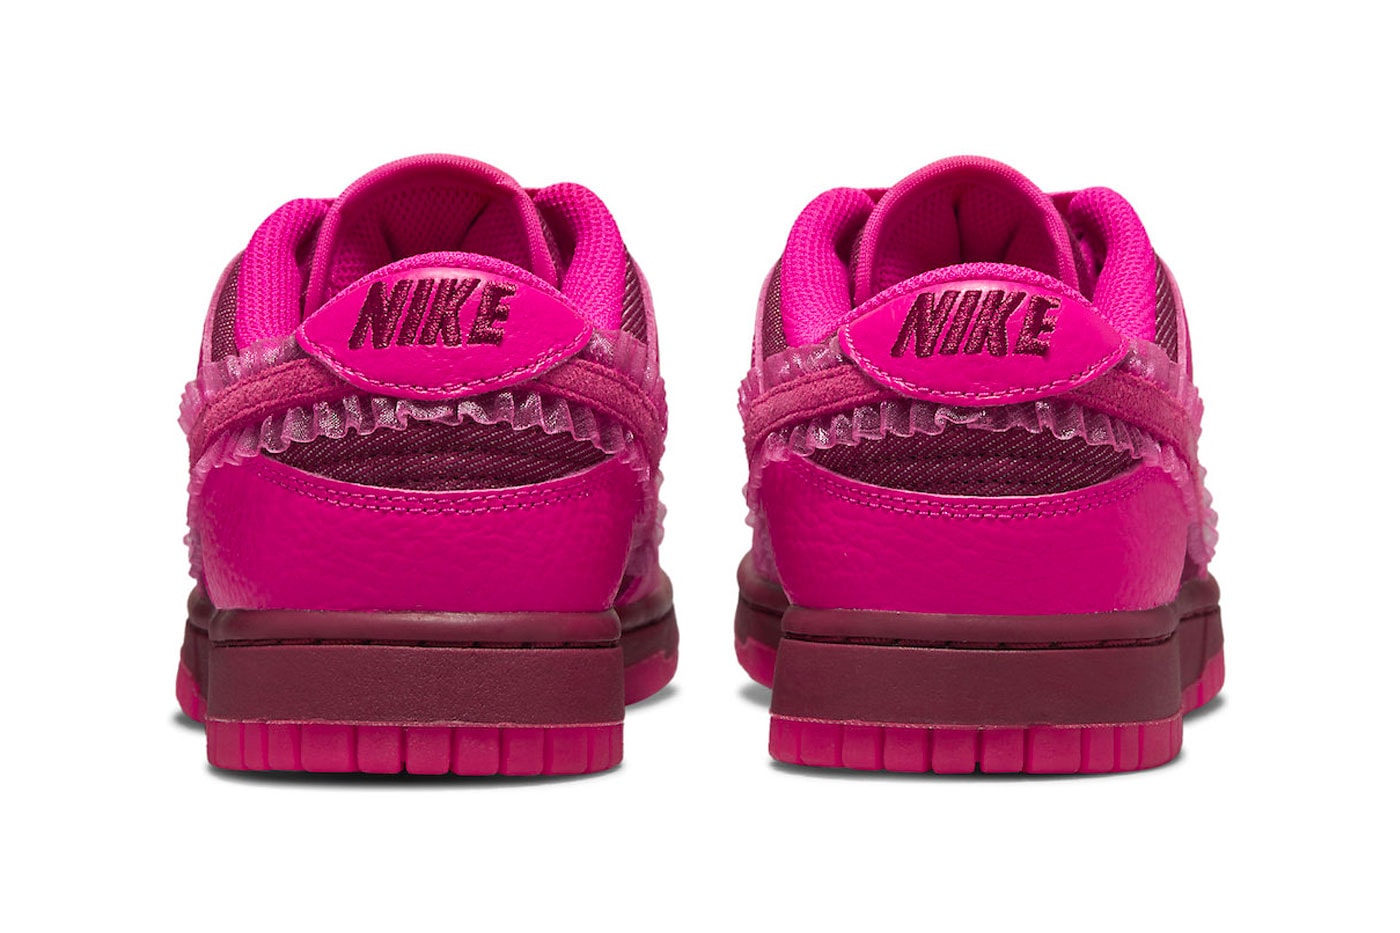 Nike Dunk Low Gets a "Valentine's Day" Treatment DQ9324-600 february team red pink prime love roses special edition